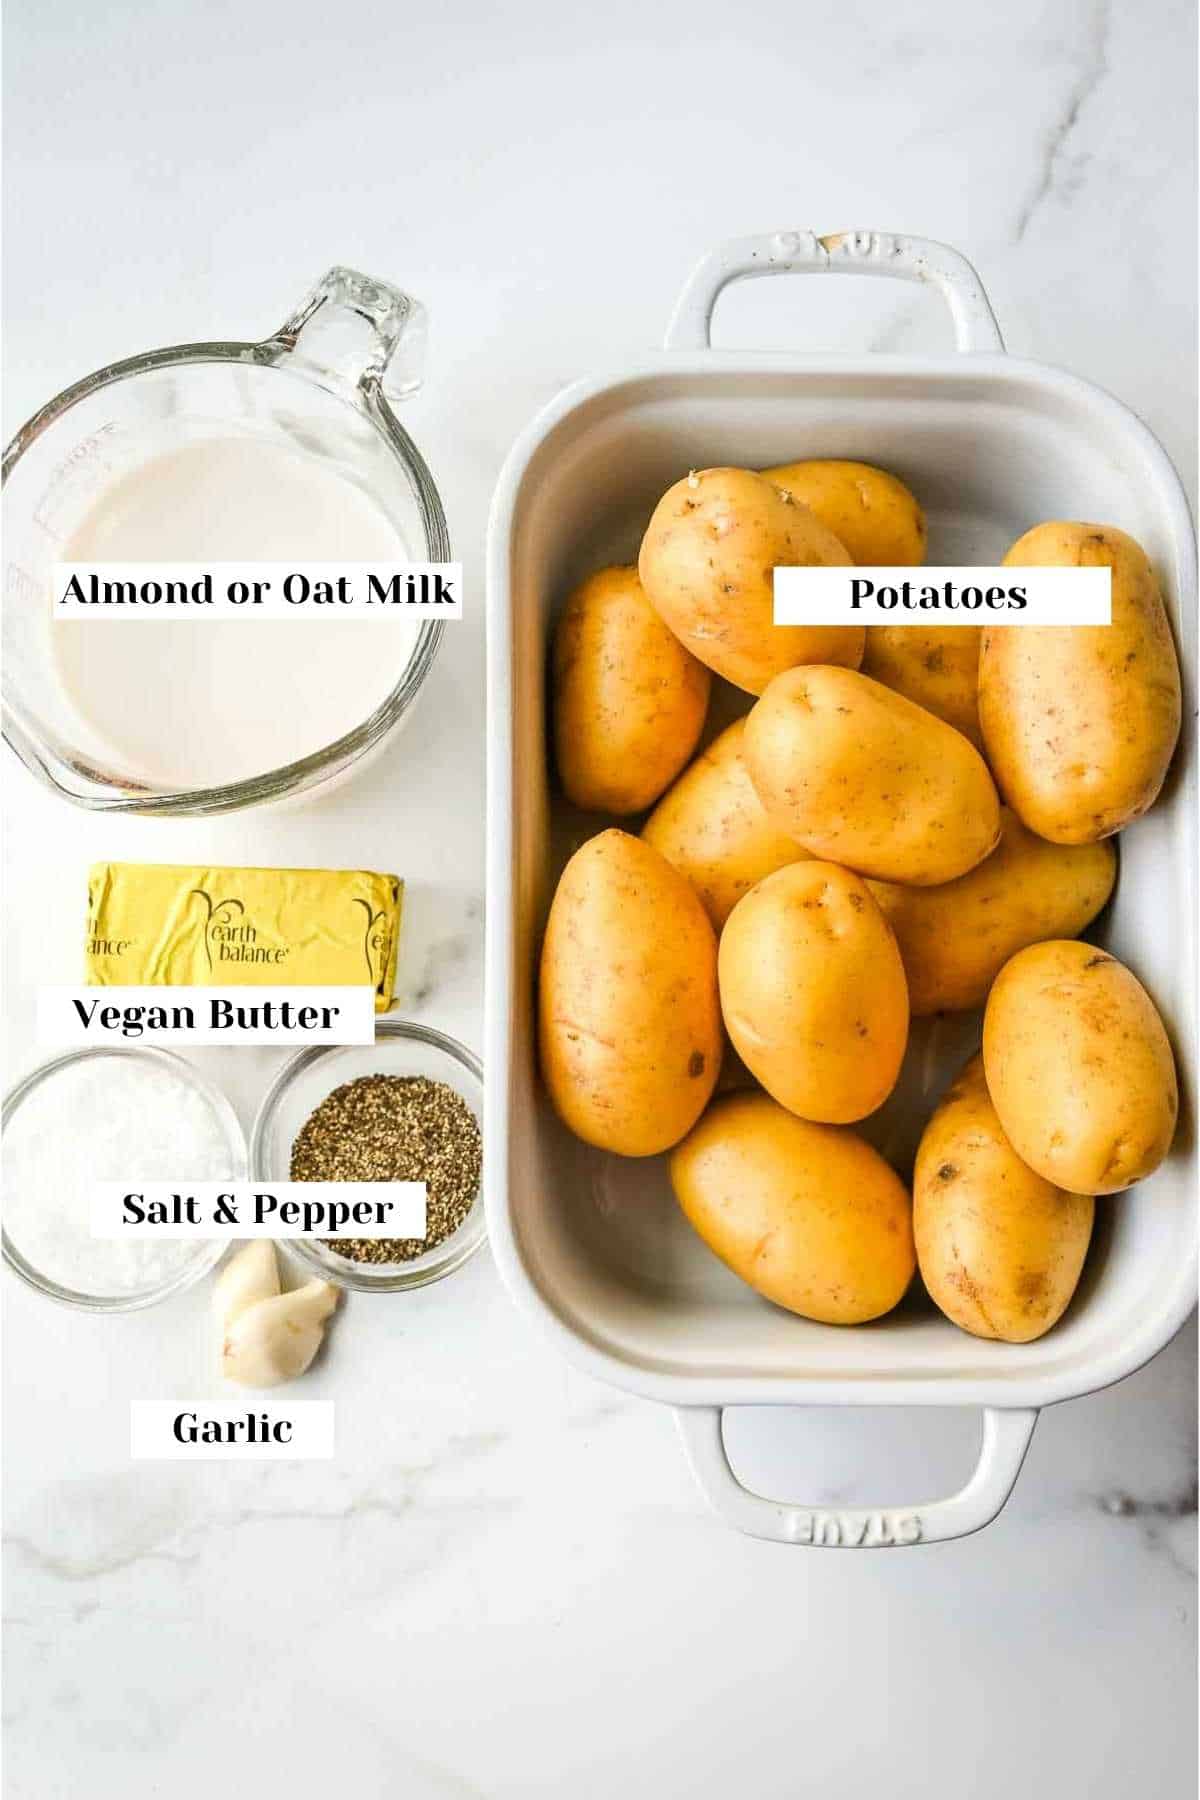 labeled ingredients for dairy-free mashed potatoes on a white background.